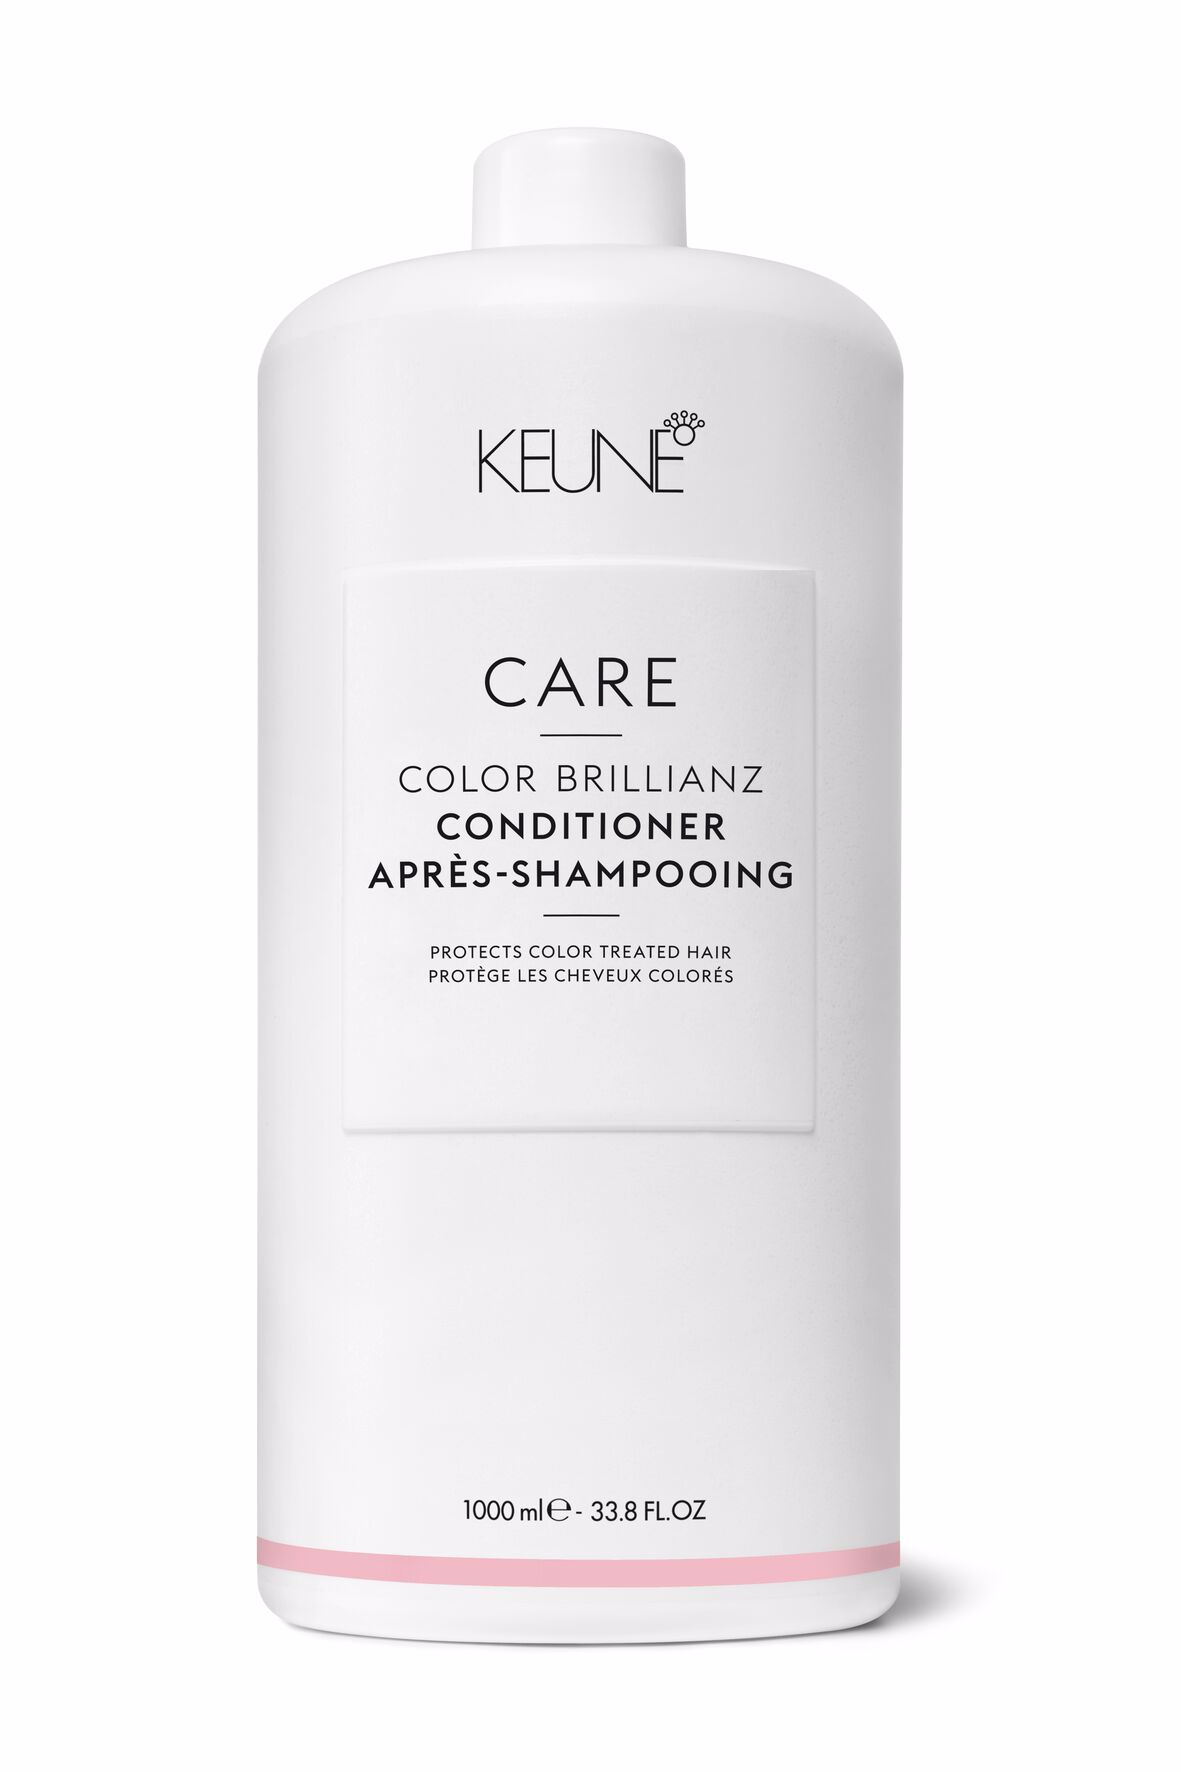 CARE COLOR BRILLIANZ CONDITIONER on keune.ch ensures enduring color brilliance. Intensively nourish your colored hair, giving it strength and smoothness. Available on keune.ch.